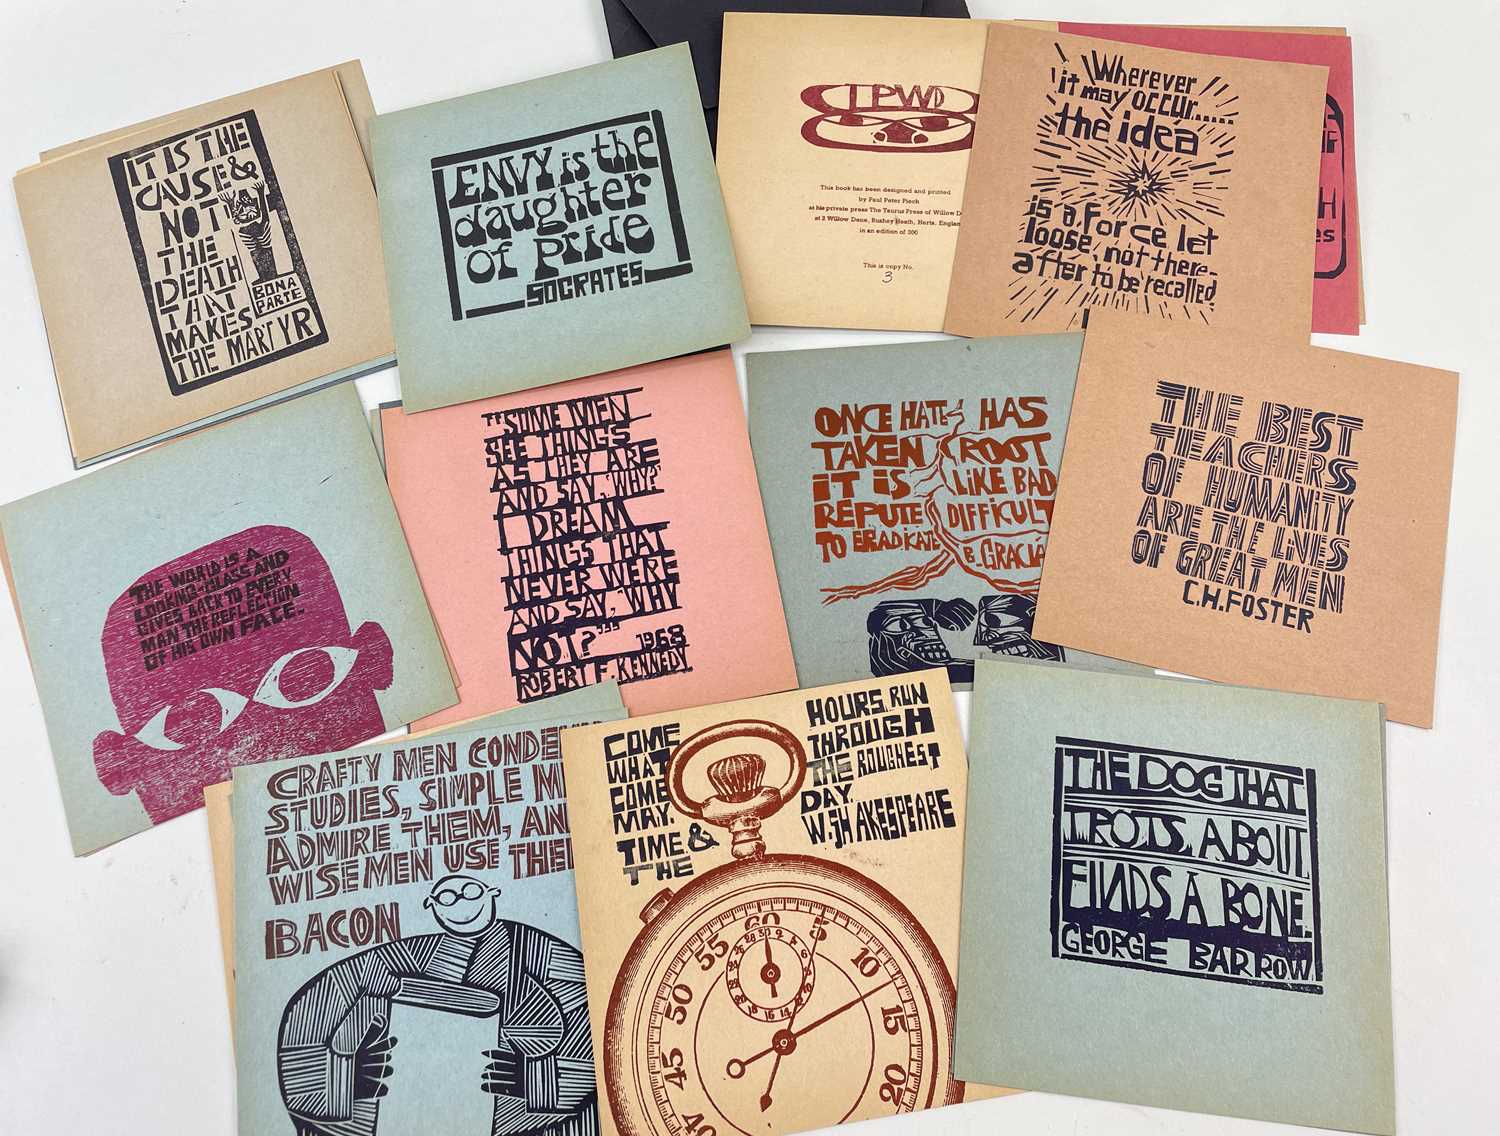 ‡ PAUL PETER PIECH limited edition (3/300) print - 24 illustrated proverbs contained in small